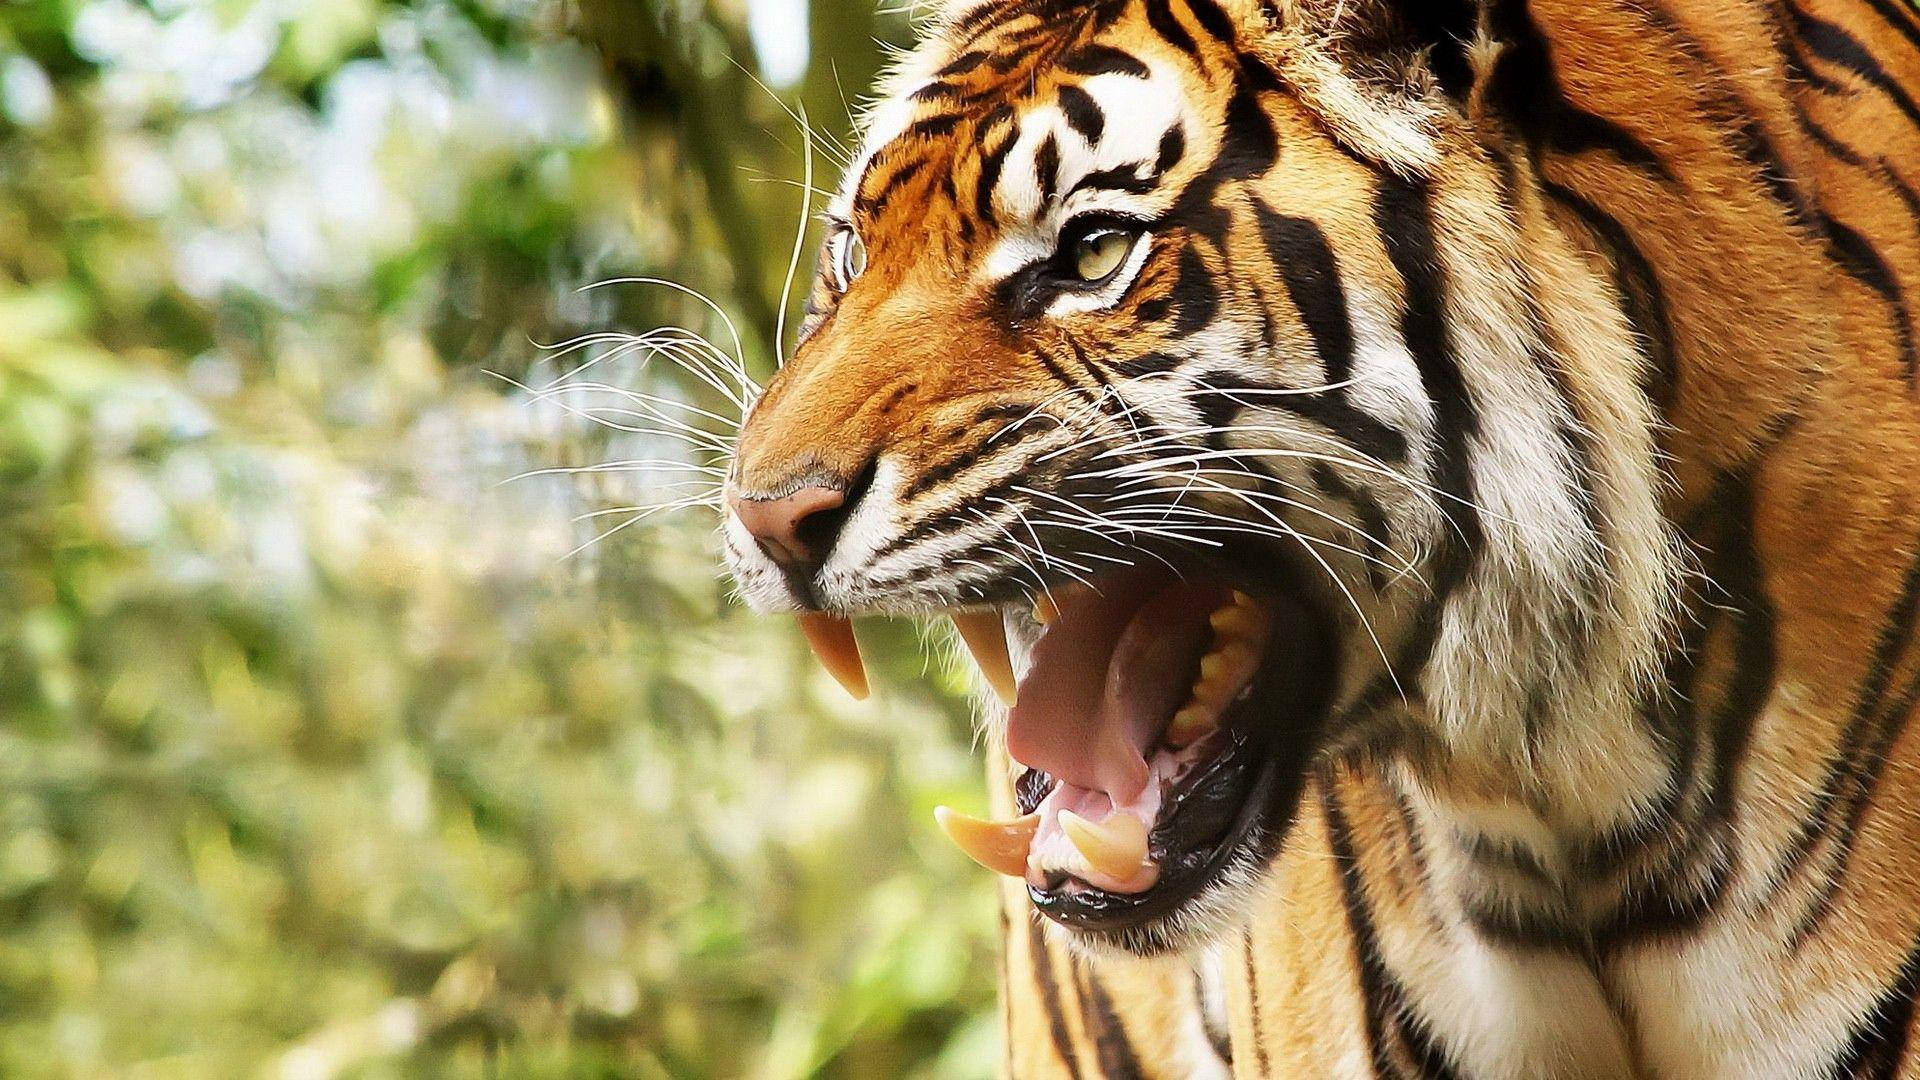 Angry Tiger Side View Background